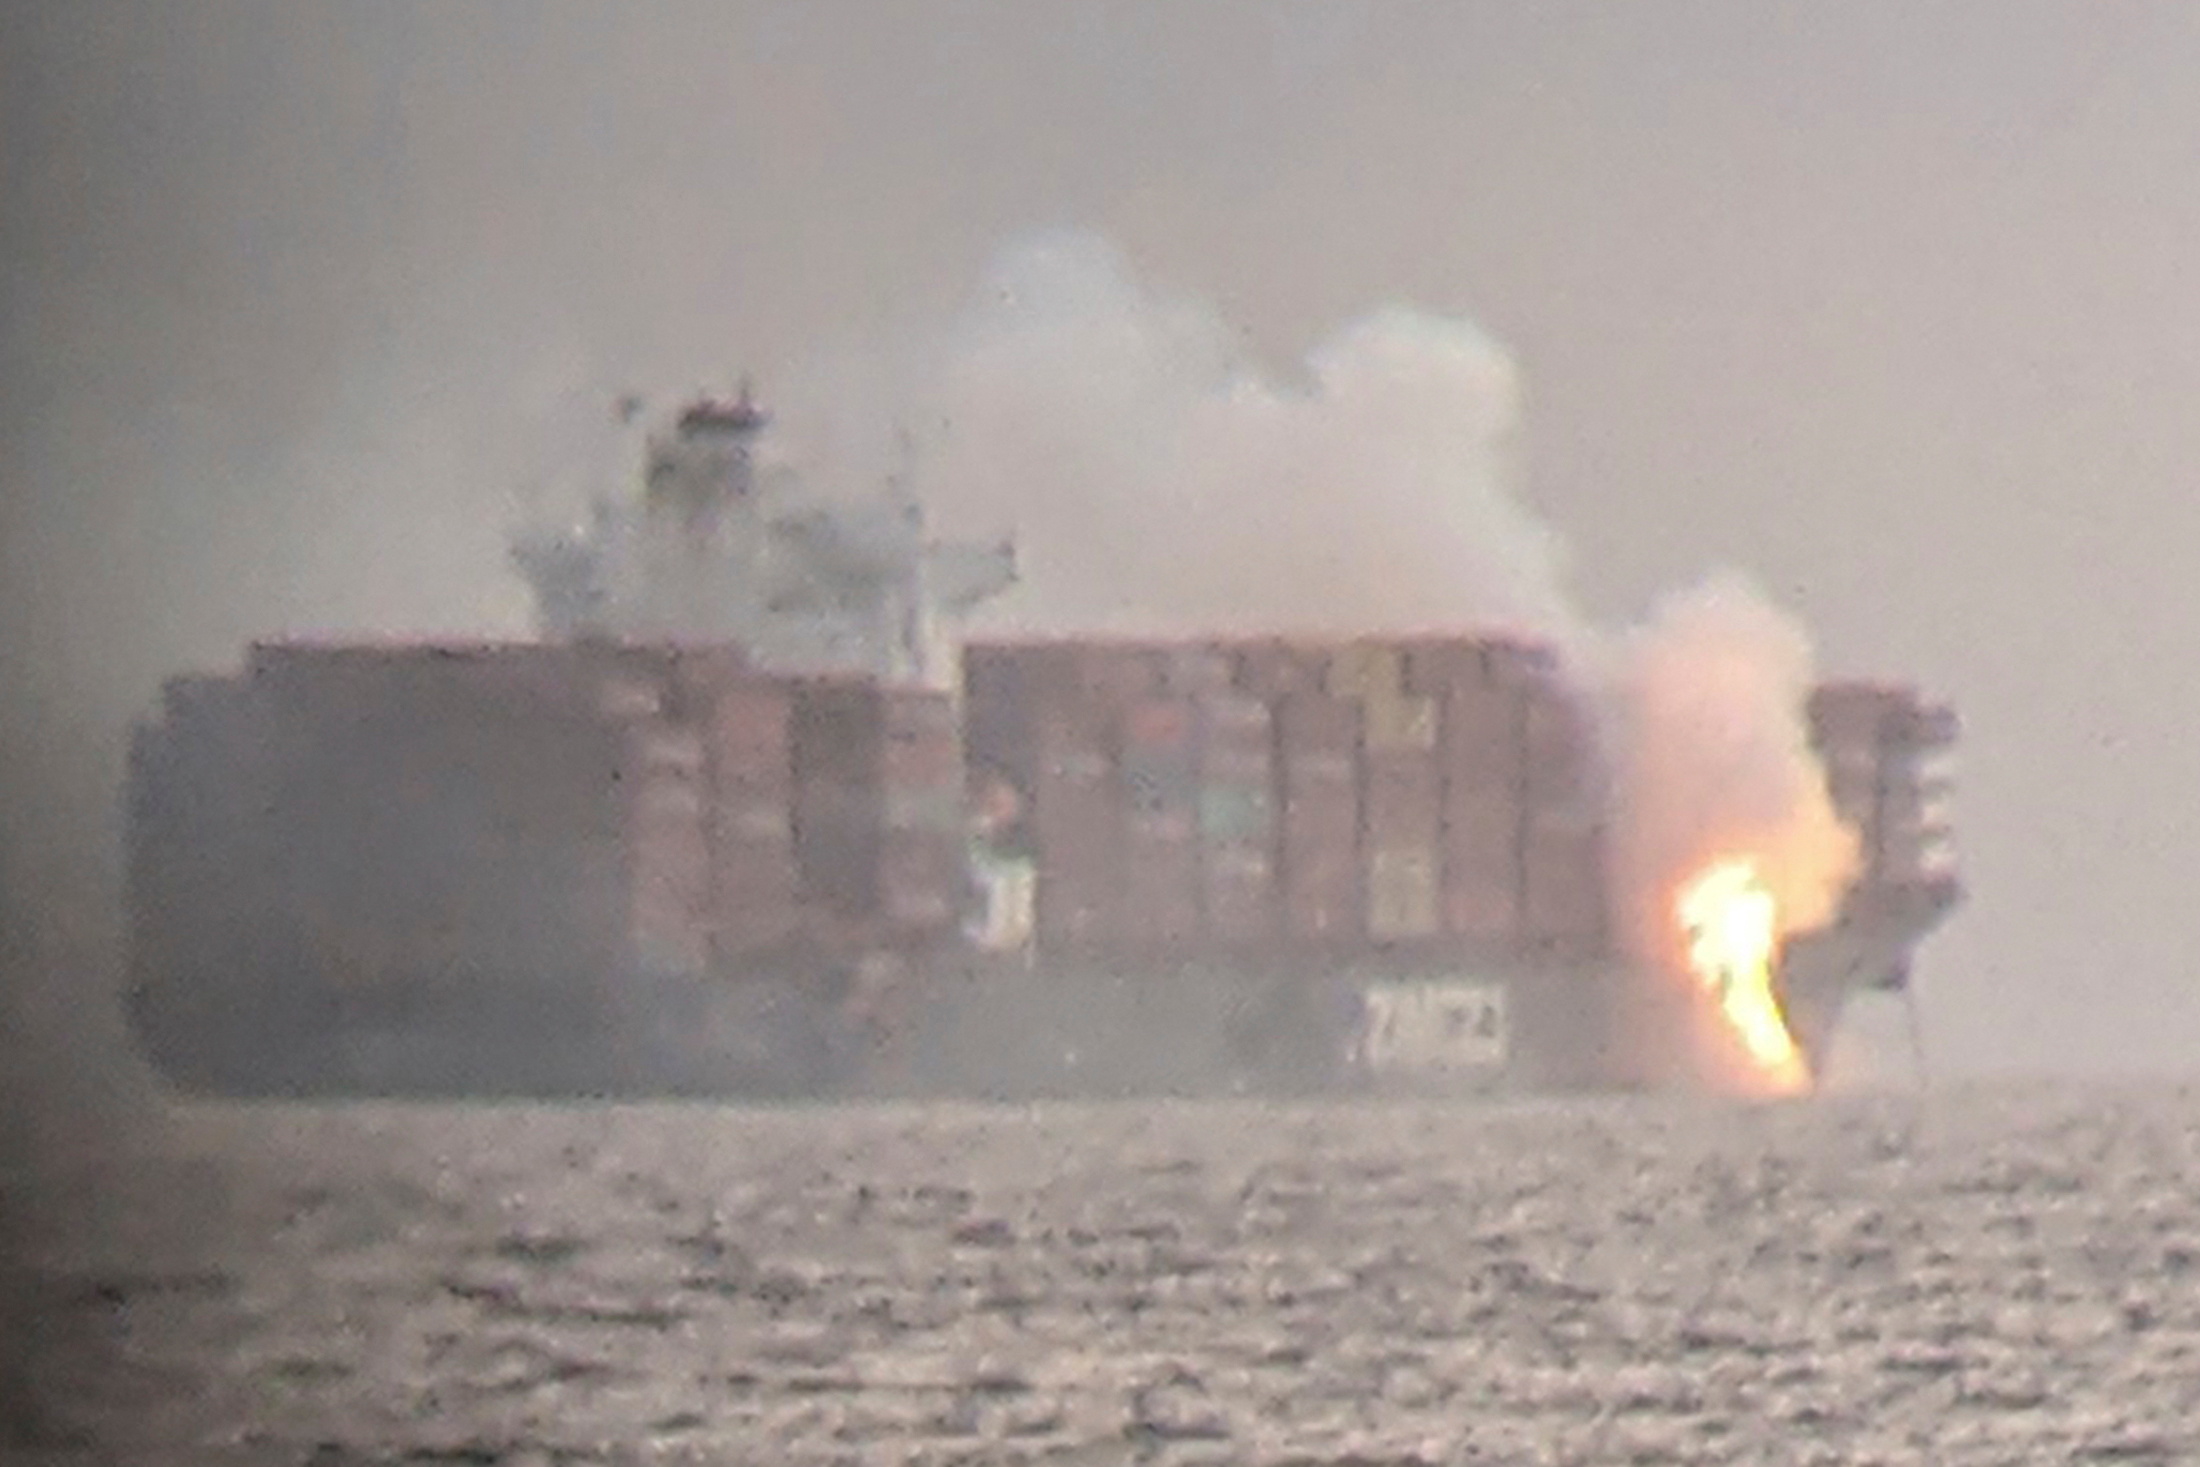 Fire cascades down from the deck of the container ship ZIM Kingston into the waters off the coast of Victoria, British Columbia, Canada, October 23, 2021, as seen through a pair of binoculars, in this image obtained via social media. SURFRIDER FOUNDATION CANADA via REUTERS 